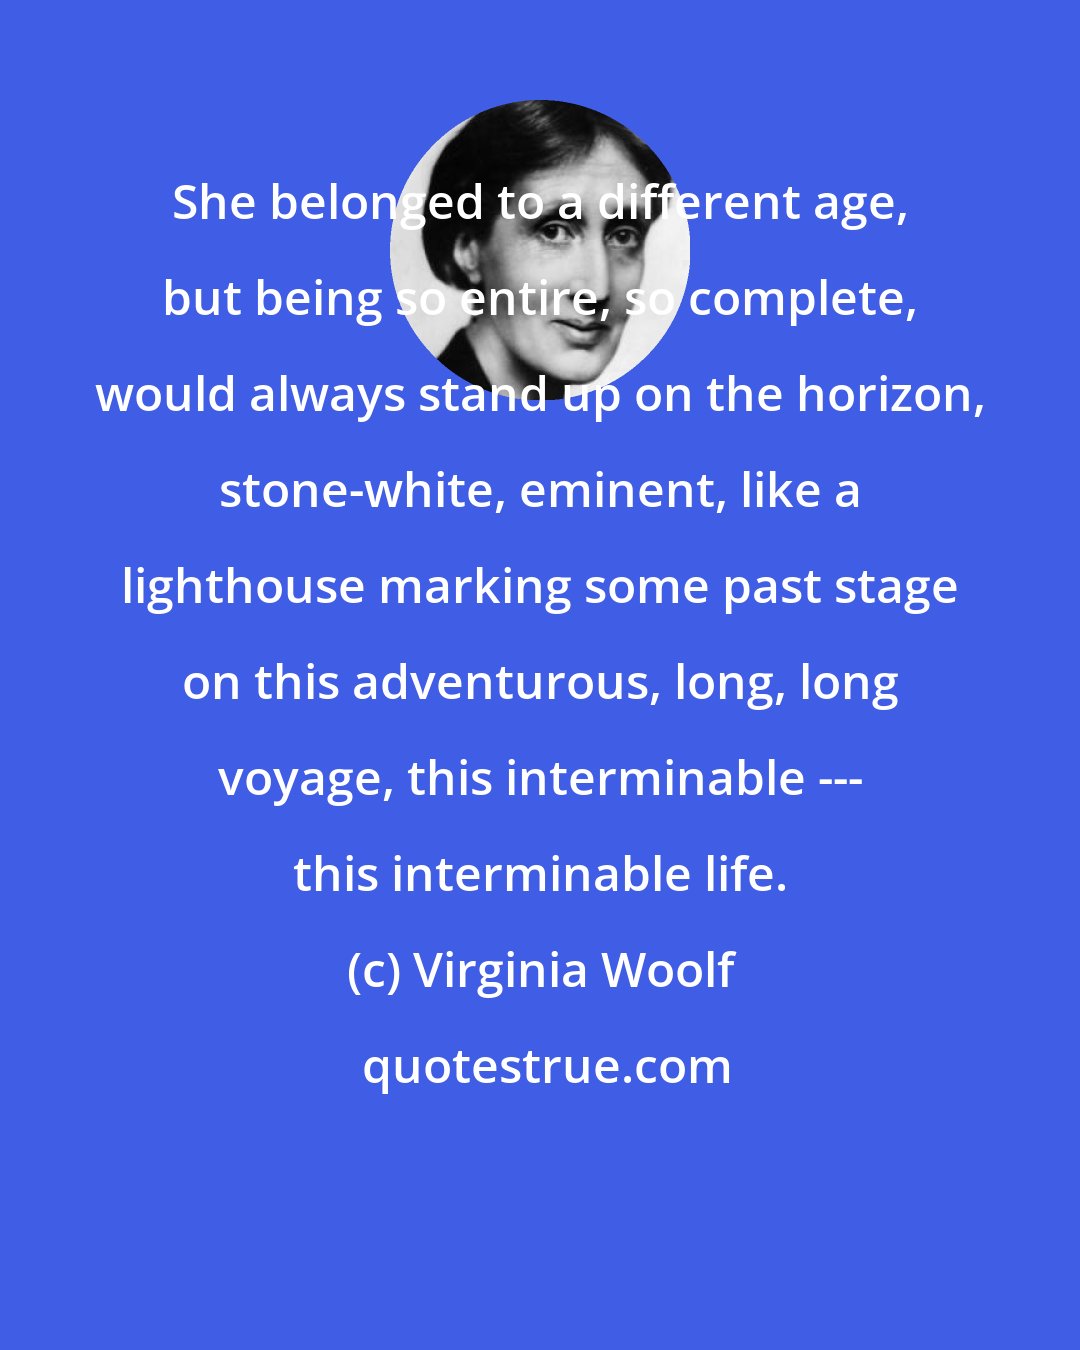 Virginia Woolf: She belonged to a different age, but being so entire, so complete, would always stand up on the horizon, stone-white, eminent, like a lighthouse marking some past stage on this adventurous, long, long voyage, this interminable --- this interminable life.